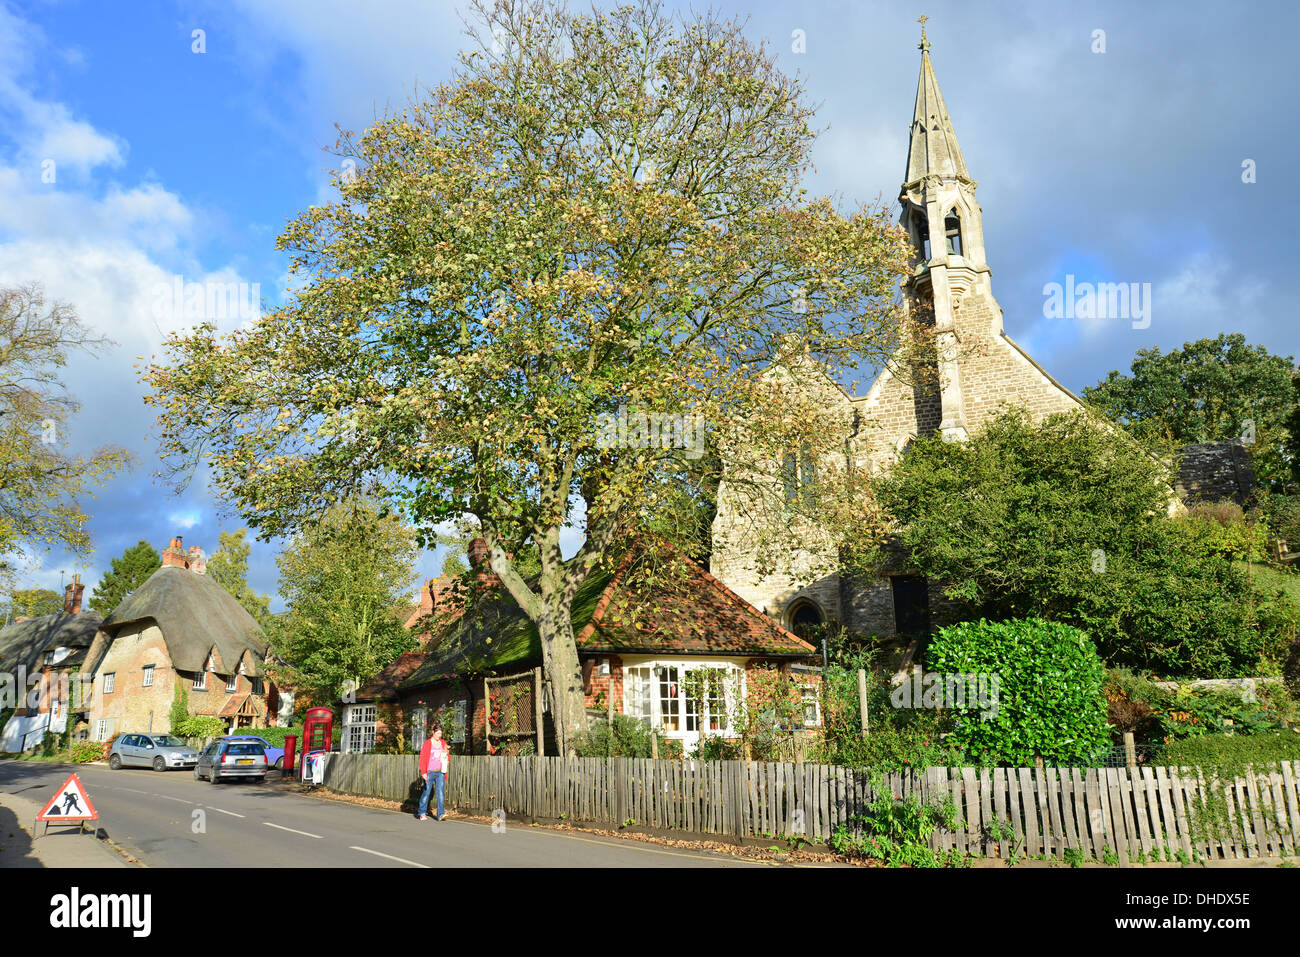 View of village showing Parish church of St. Michael & All Angels, Clifton Hampden, Oxfordshire, England, United Kingdom Stock Photo